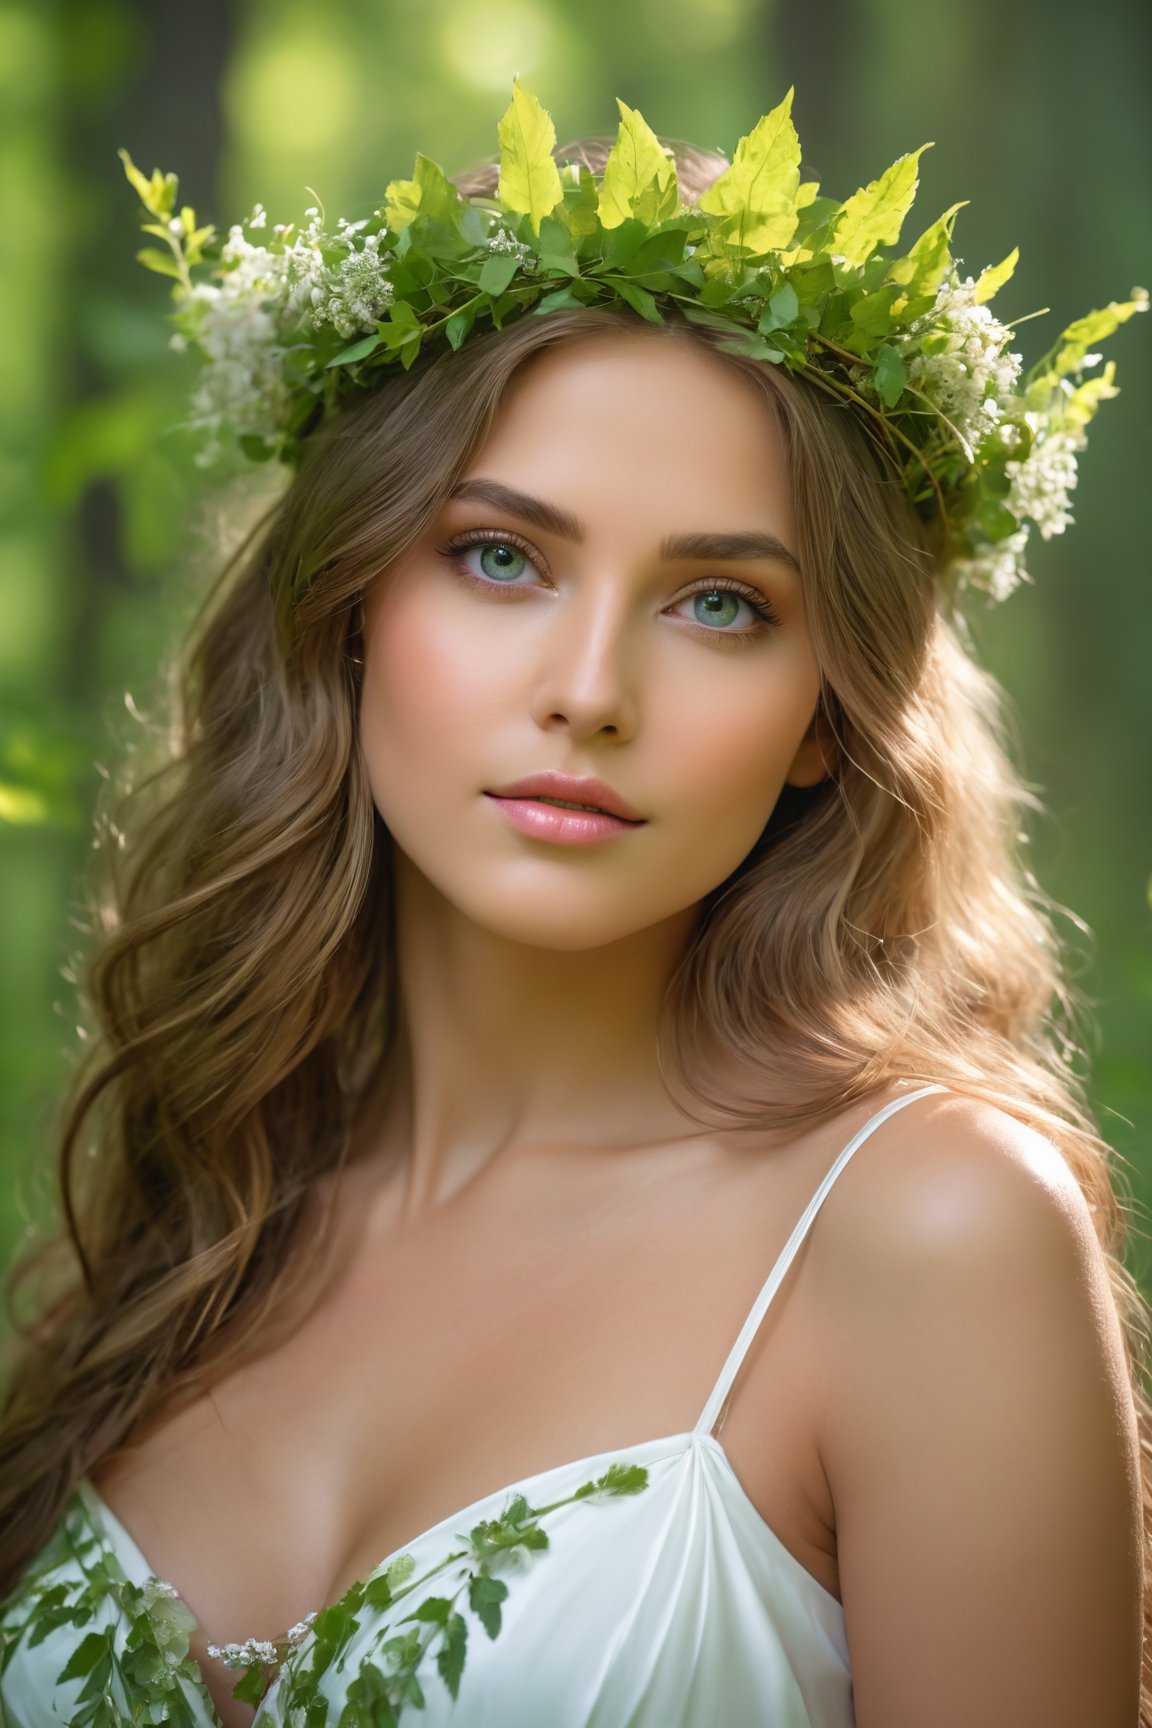 (best quality, 4k, 8k, highres, masterpiece:1.2), ultra-detailed, (realistic, photorealistic, photo-realistic:1.37), nature goddess, leaf body, portrait, greenery, wildflowers, breathtaking eyes, serene expression, graceful pose, ethereal beauty, luminous skin, flowing hair, elegant crown of leaves, soft natural light, vibrant colors, mythical essence, surreal atmosphere, dreamlike aura, harmonious connection with nature, enchanted forest